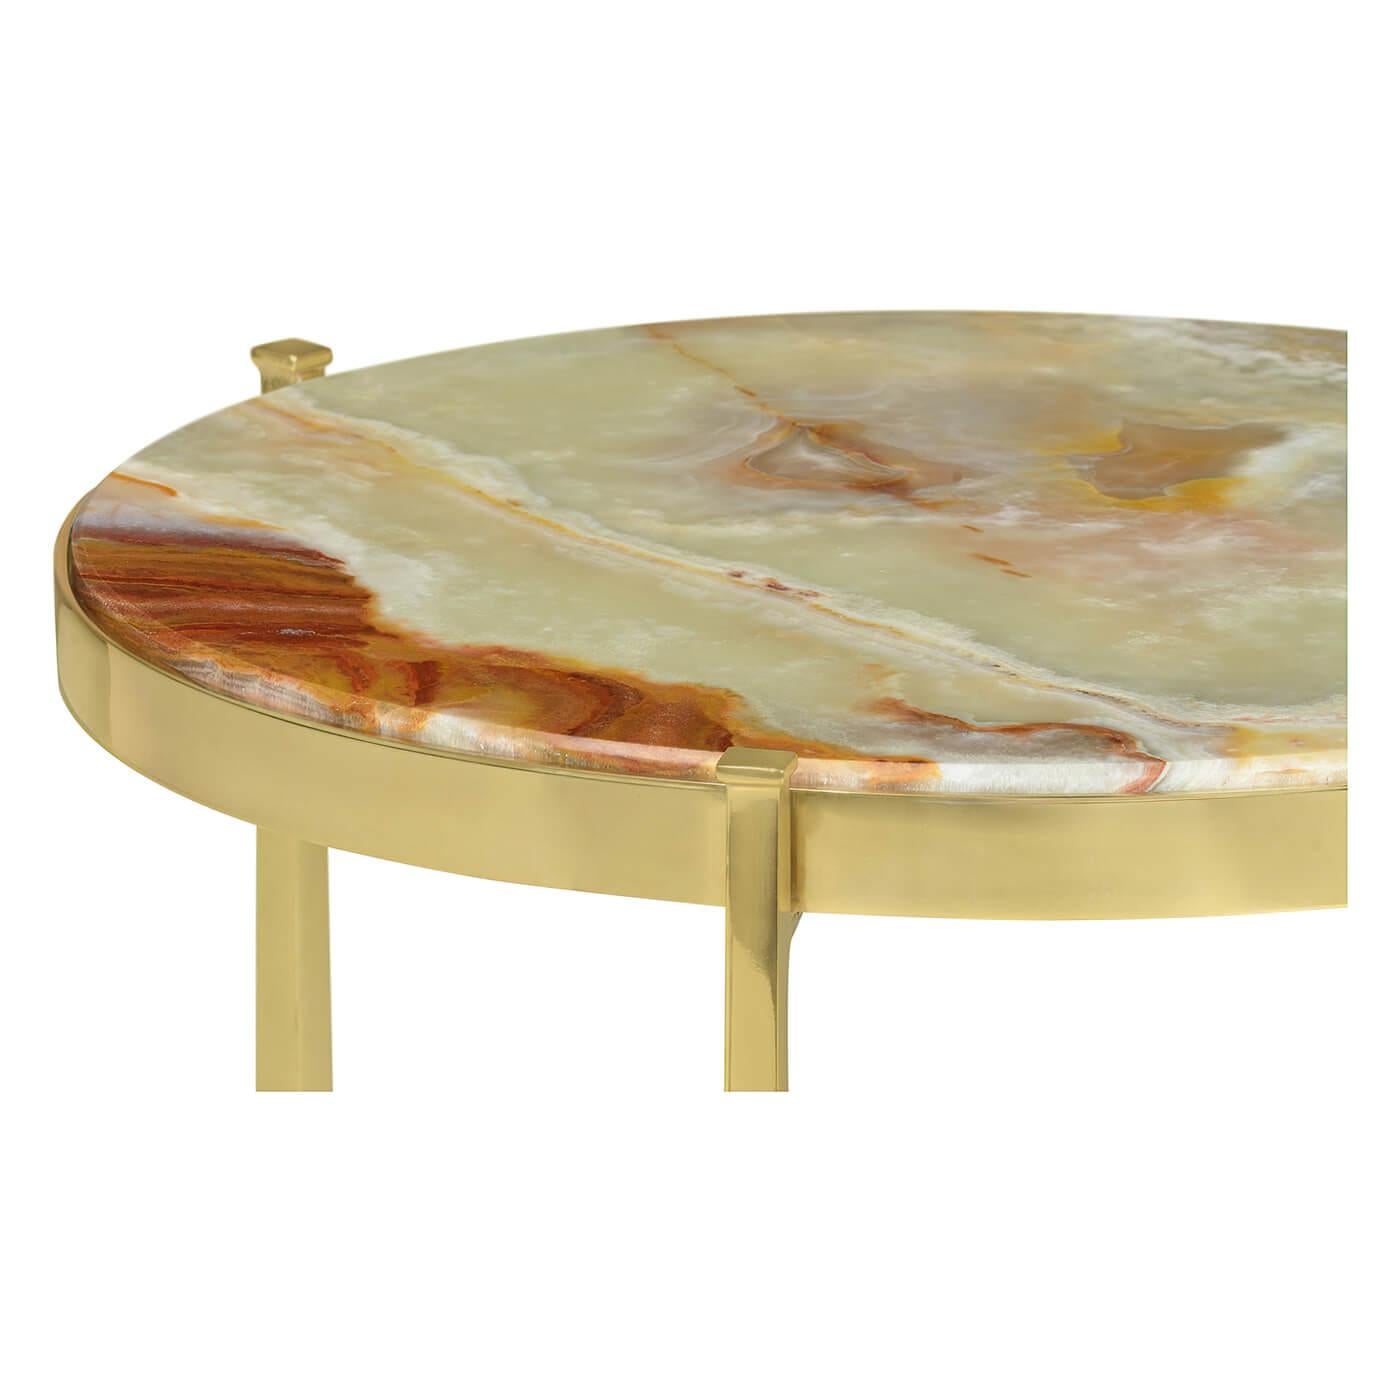 Art Deco style side table with an onyx stone top, on a solid brass three-legged base with tapered square column forms legs and a triple stretcher.

Dimensions: 20 1/8